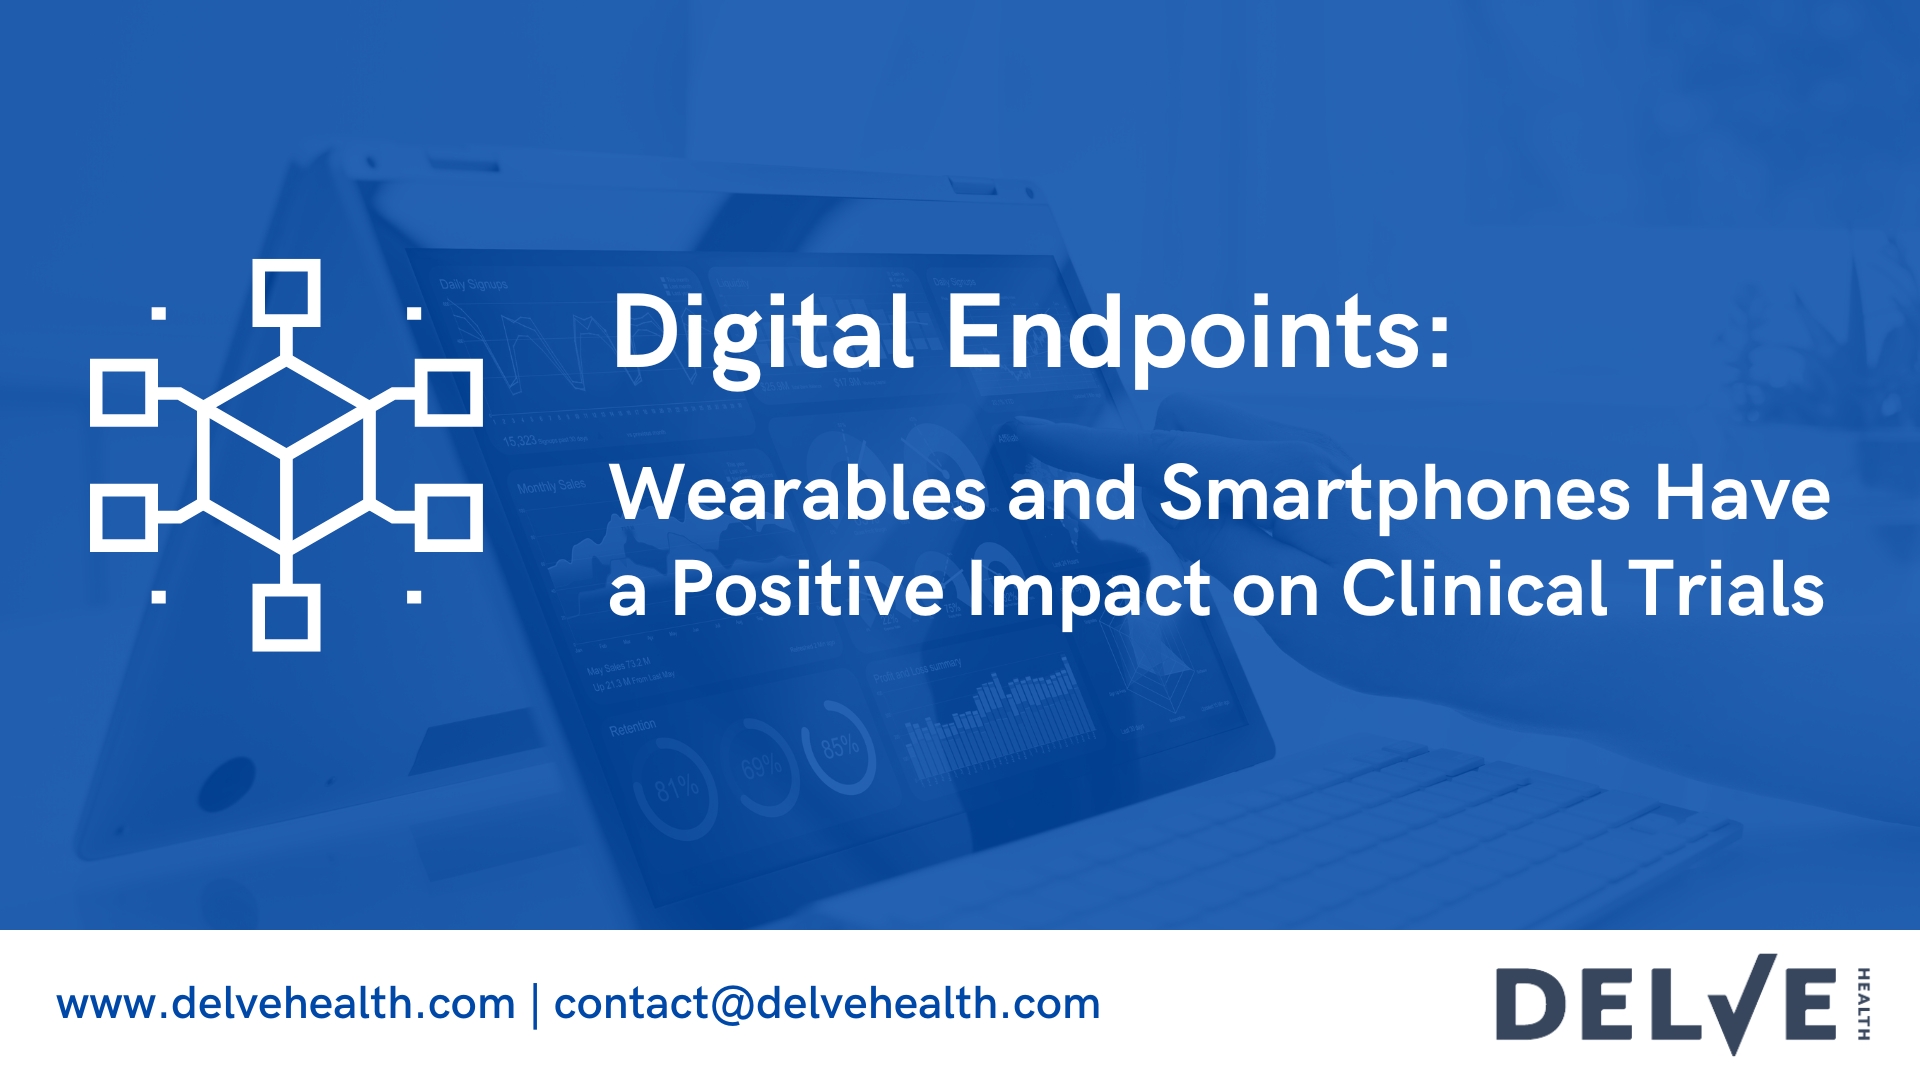 Delve Health's platform leverages digital endpoints, collected from smartphones and multiple wearable devices, to support your clinical trial.